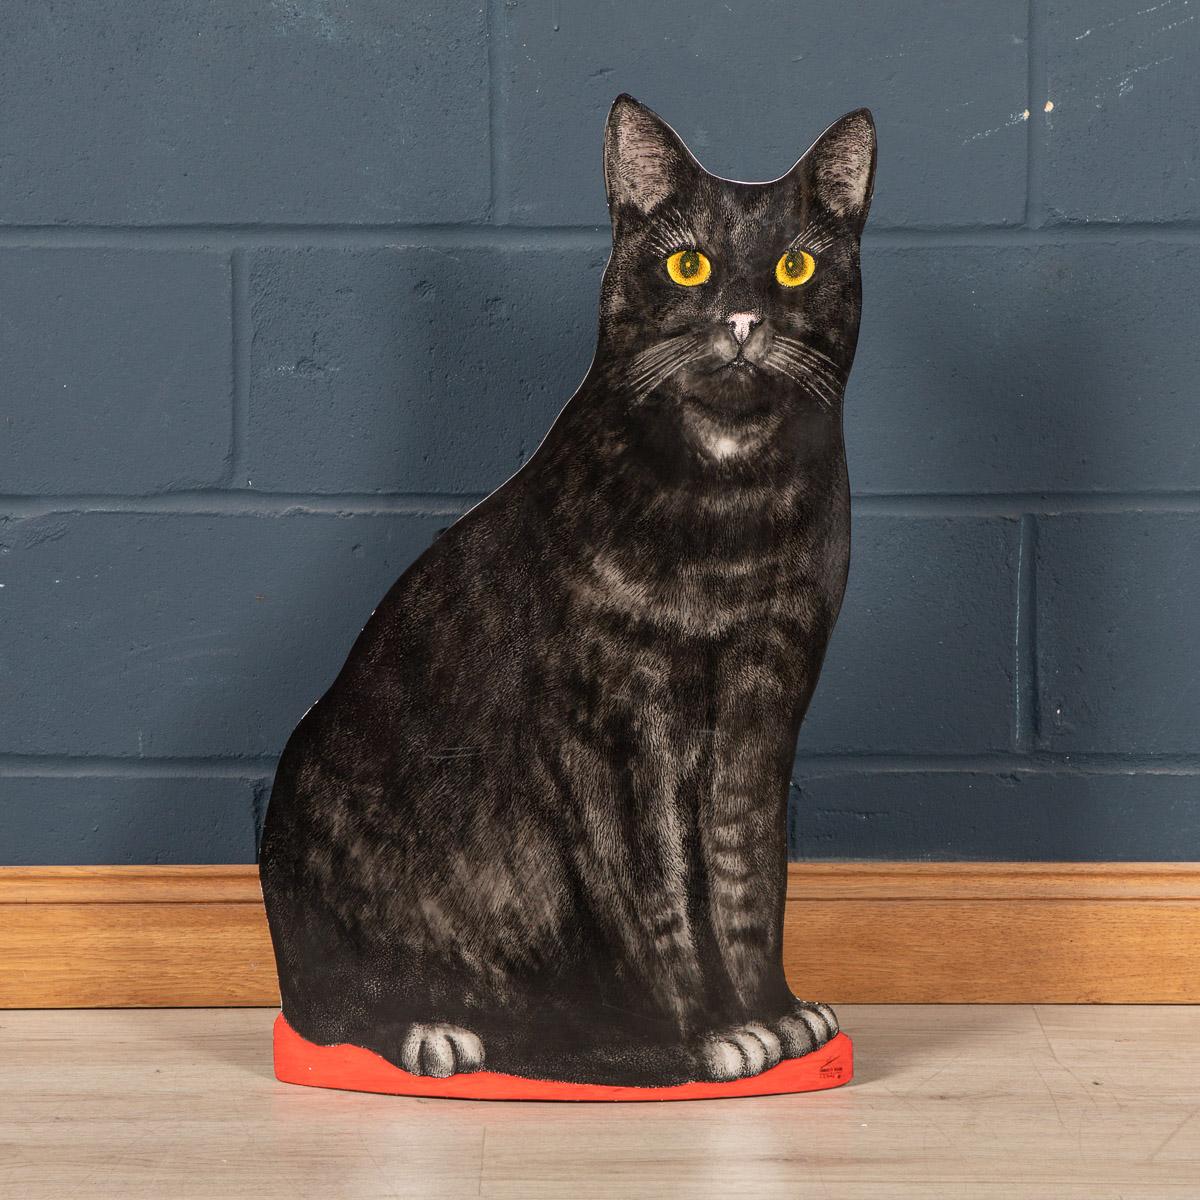 An umbrella stand in the form of a cat by Fornasetti, made in Italy around 2007. Nicknamed 'Micione' (or large pussy cat), this stand is dates 2007, made from silkscreen and painted metal. Numbered and dated 'N.2 2007' to the lower right, with a